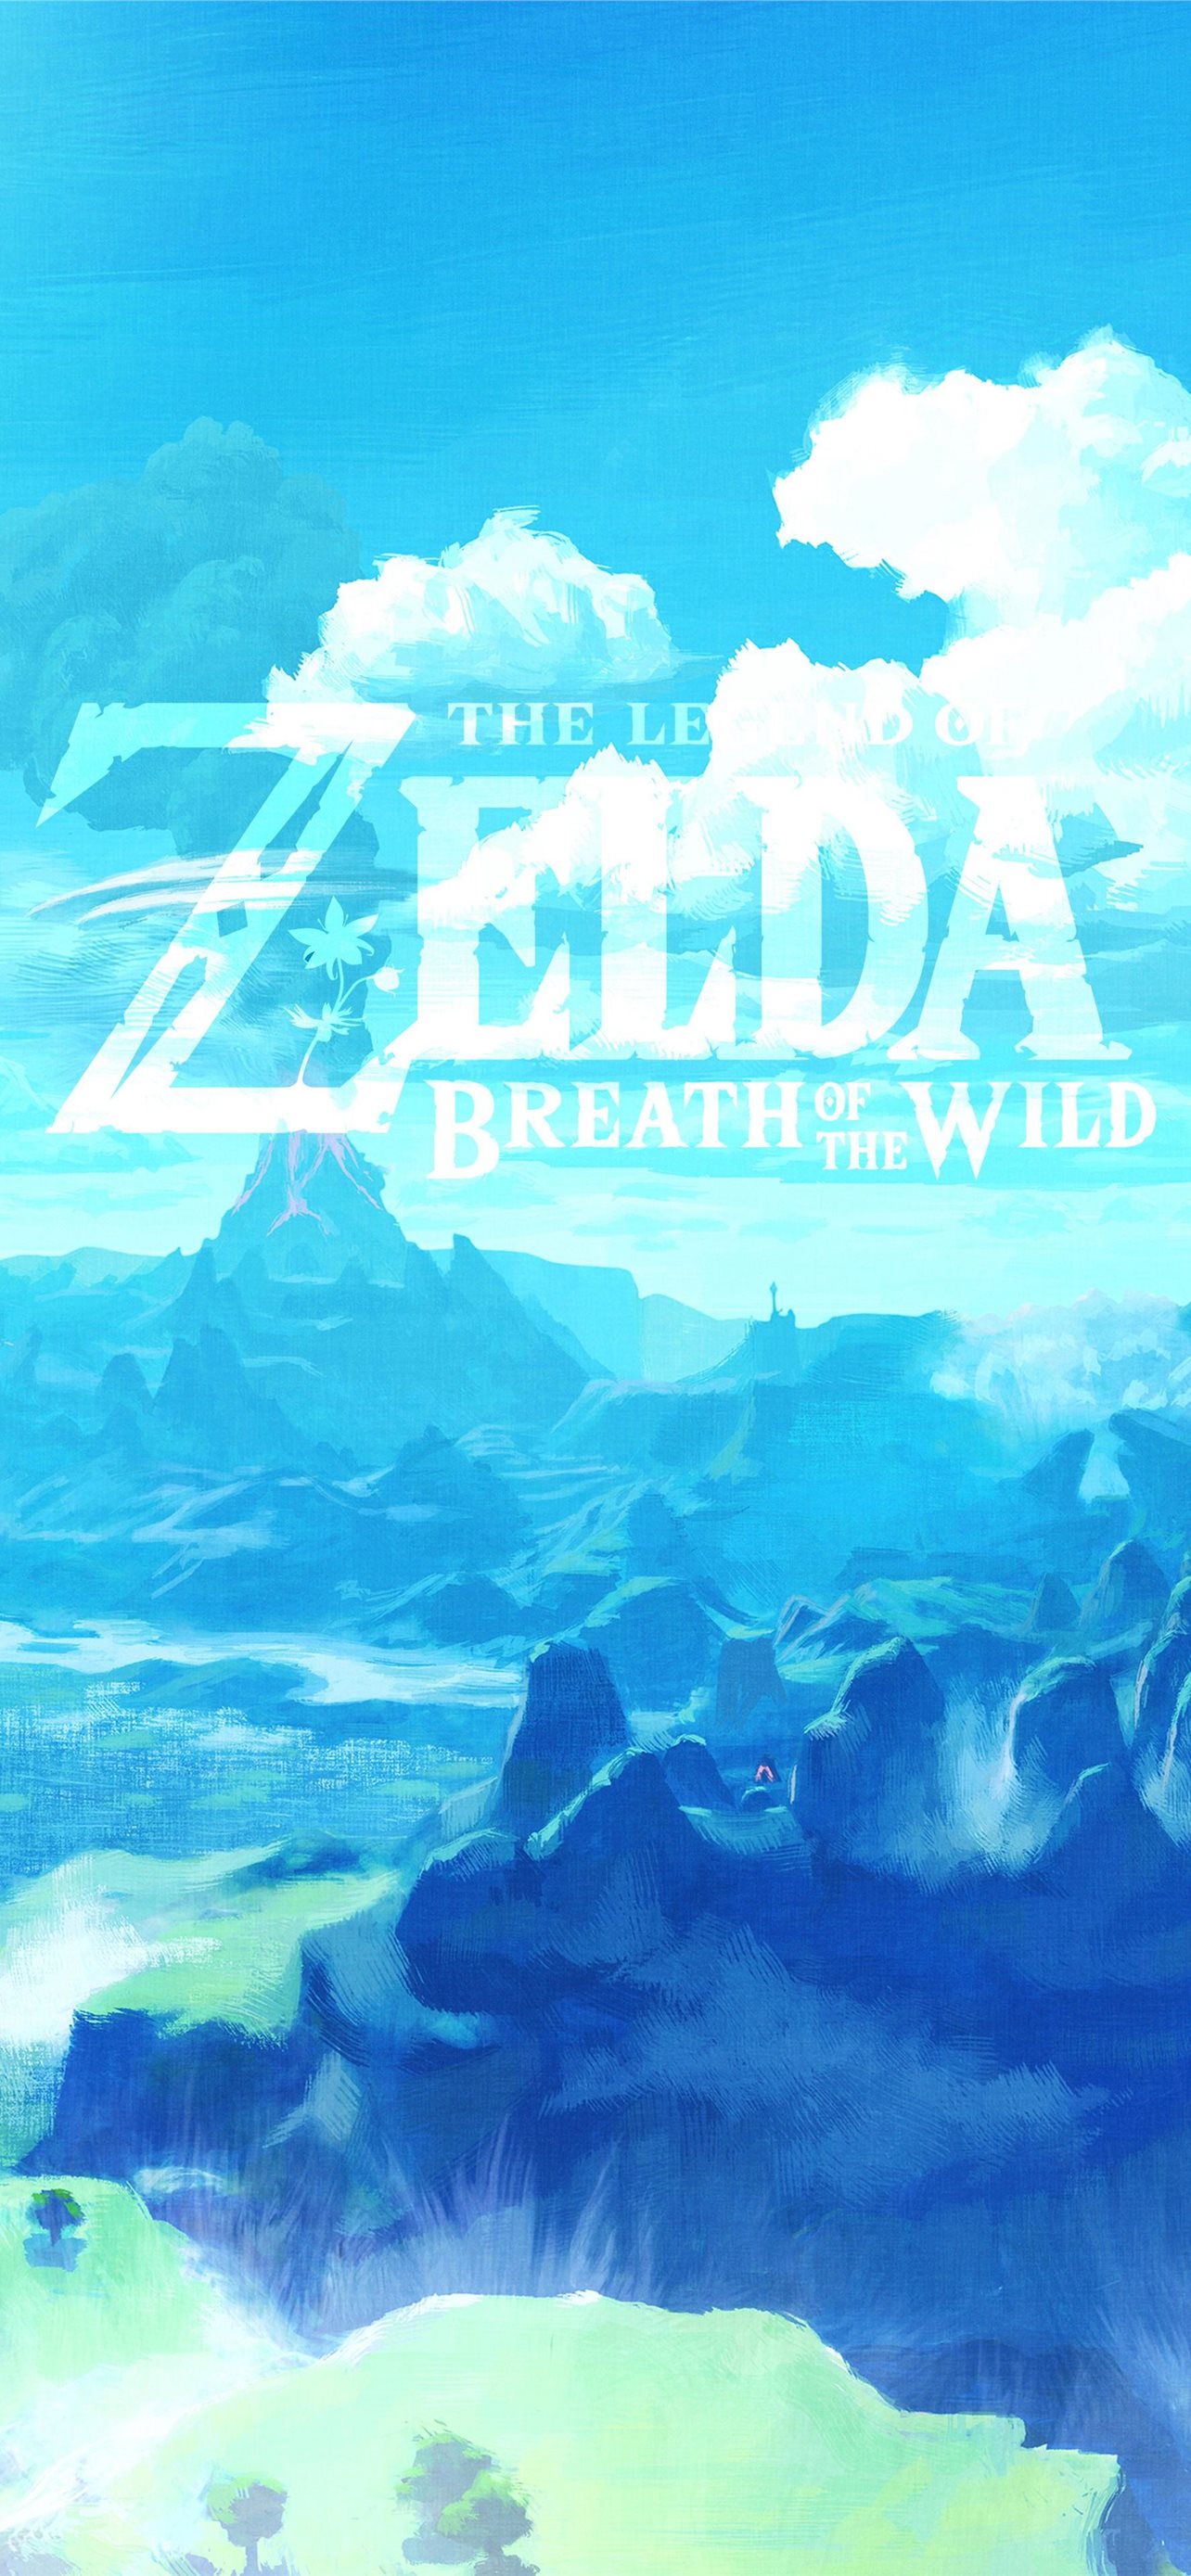 The Legend Of Zelda Breath Of The Wild Hd Iphone Wallpapers Free Download